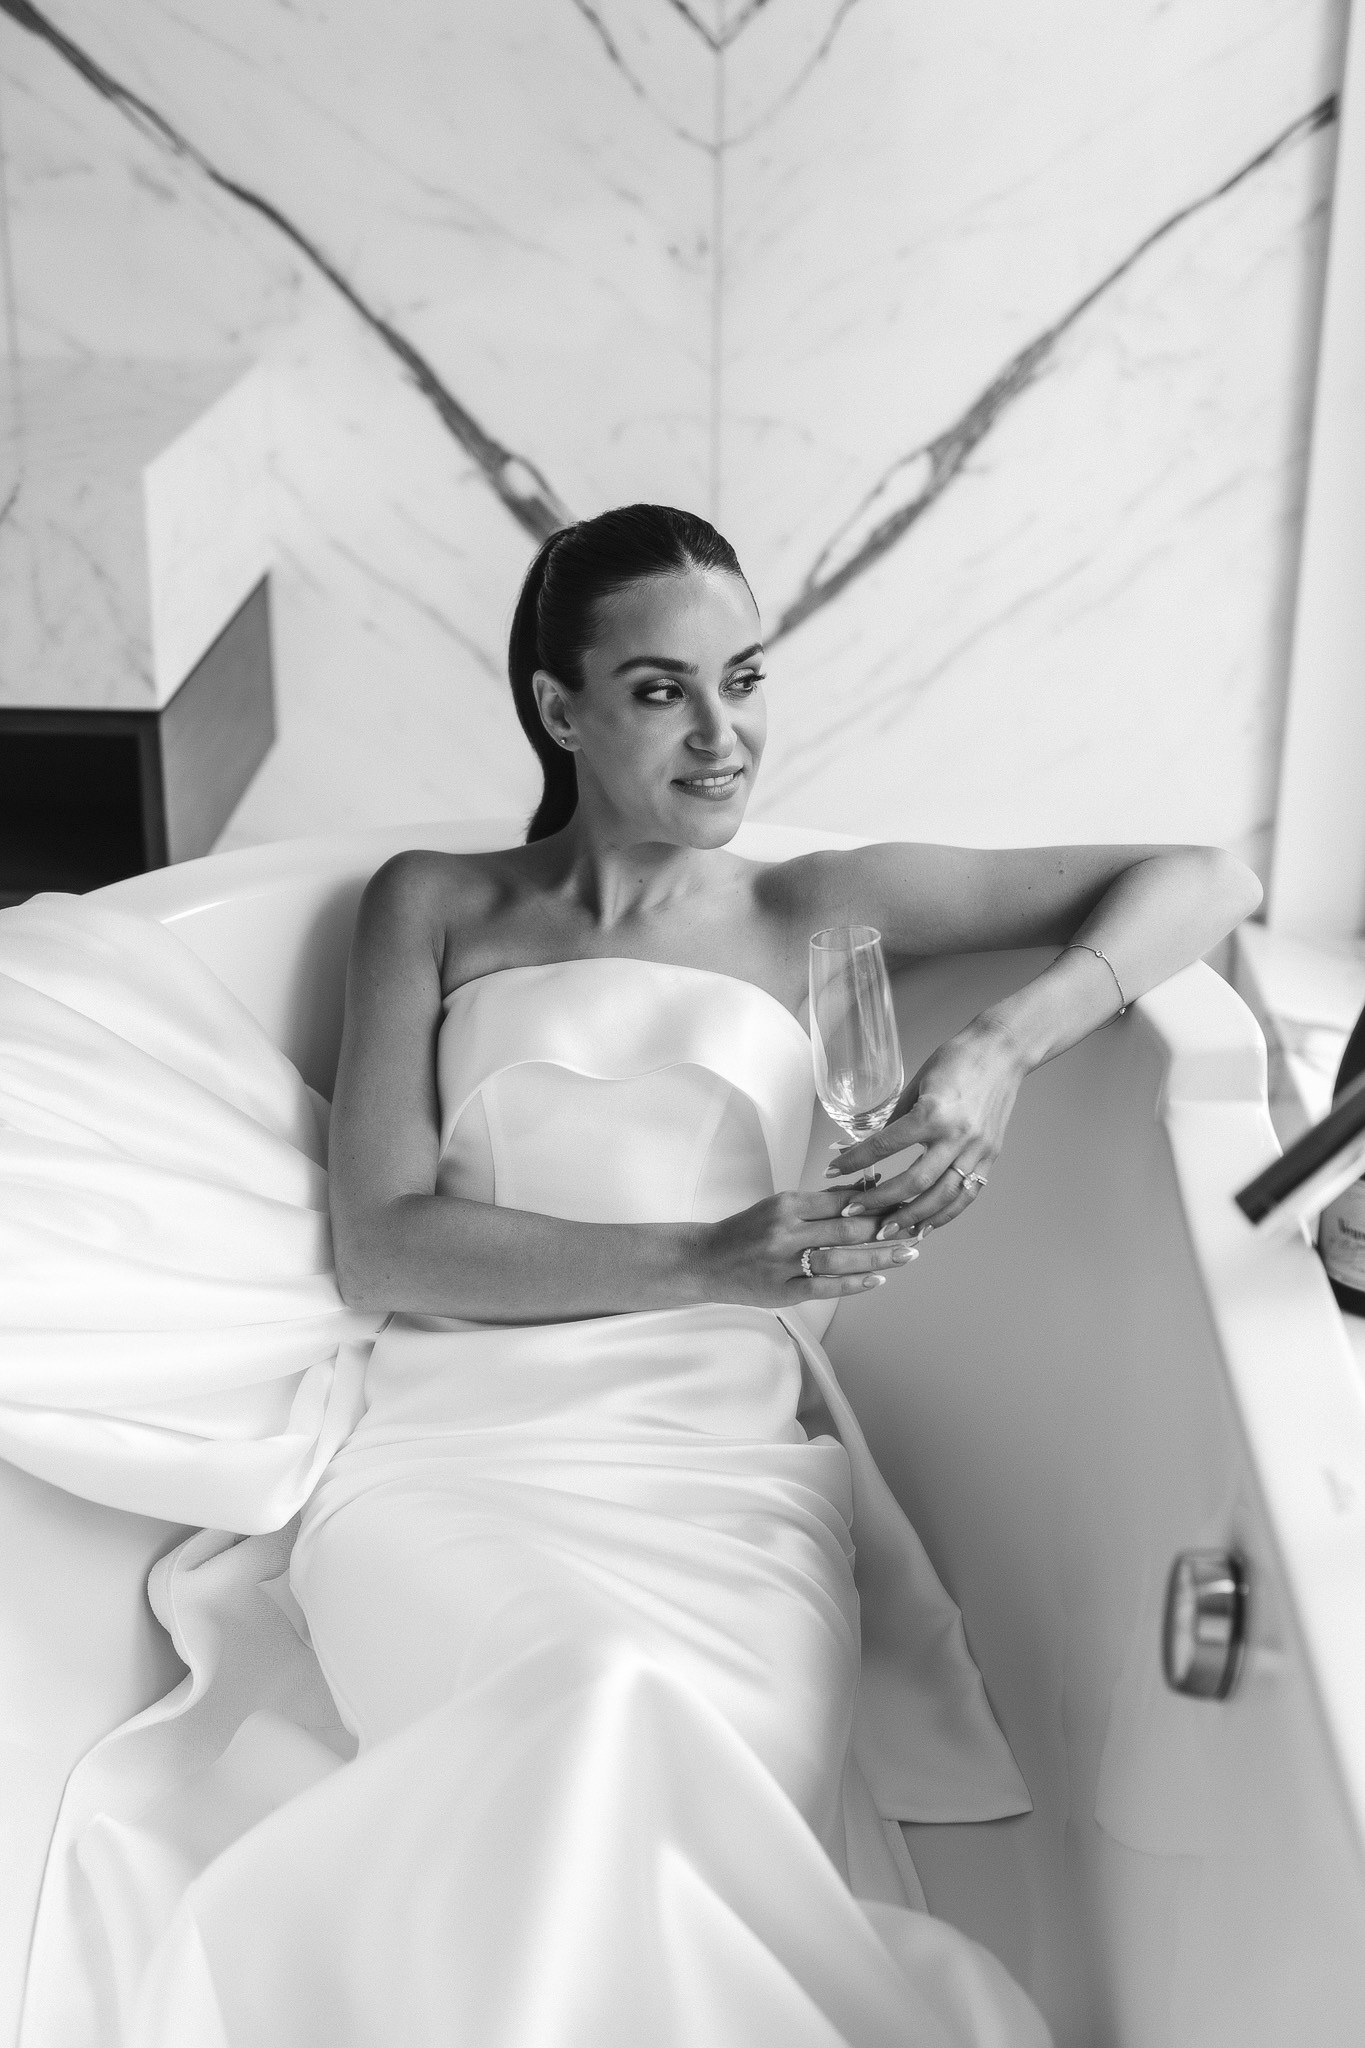 The bride in a wedding dress holding a champagne glass in a white bathtub